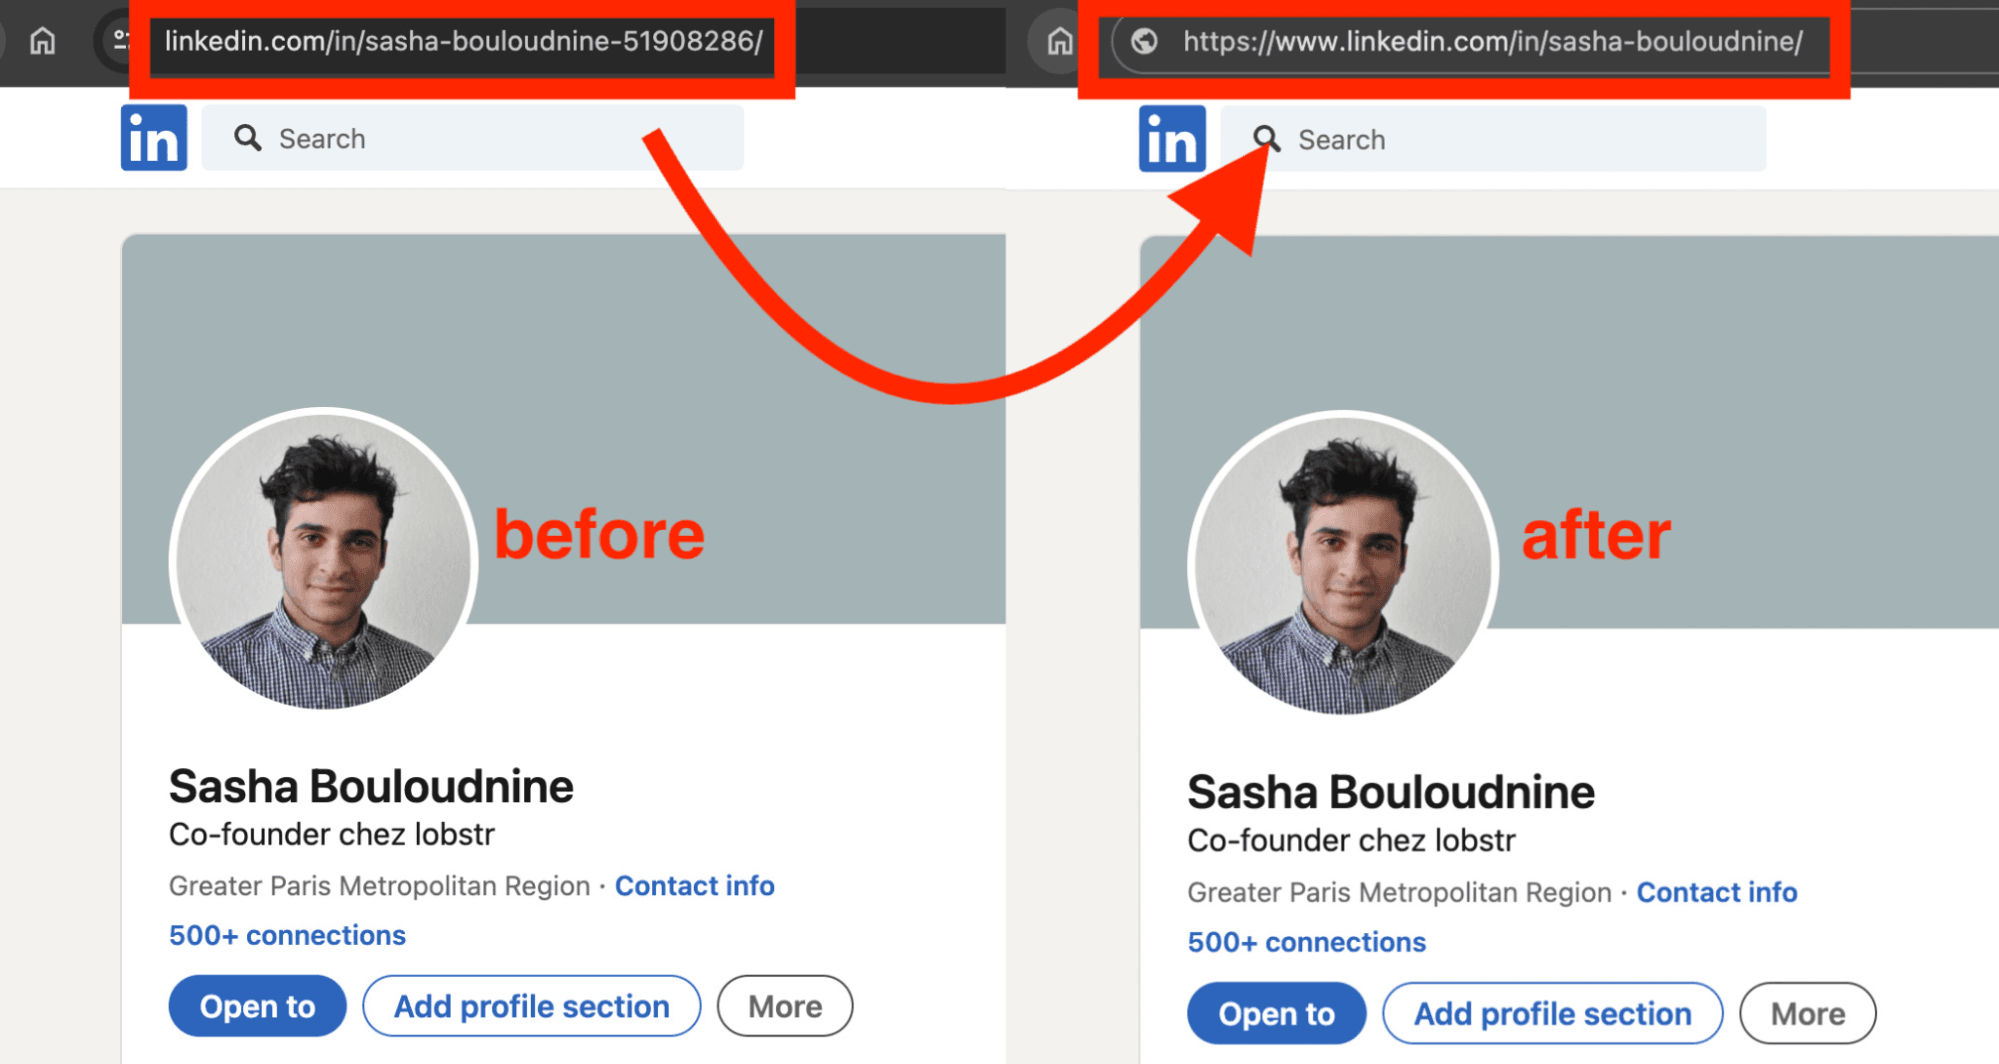 linkedin url before after removing chain of random characters - image21.png